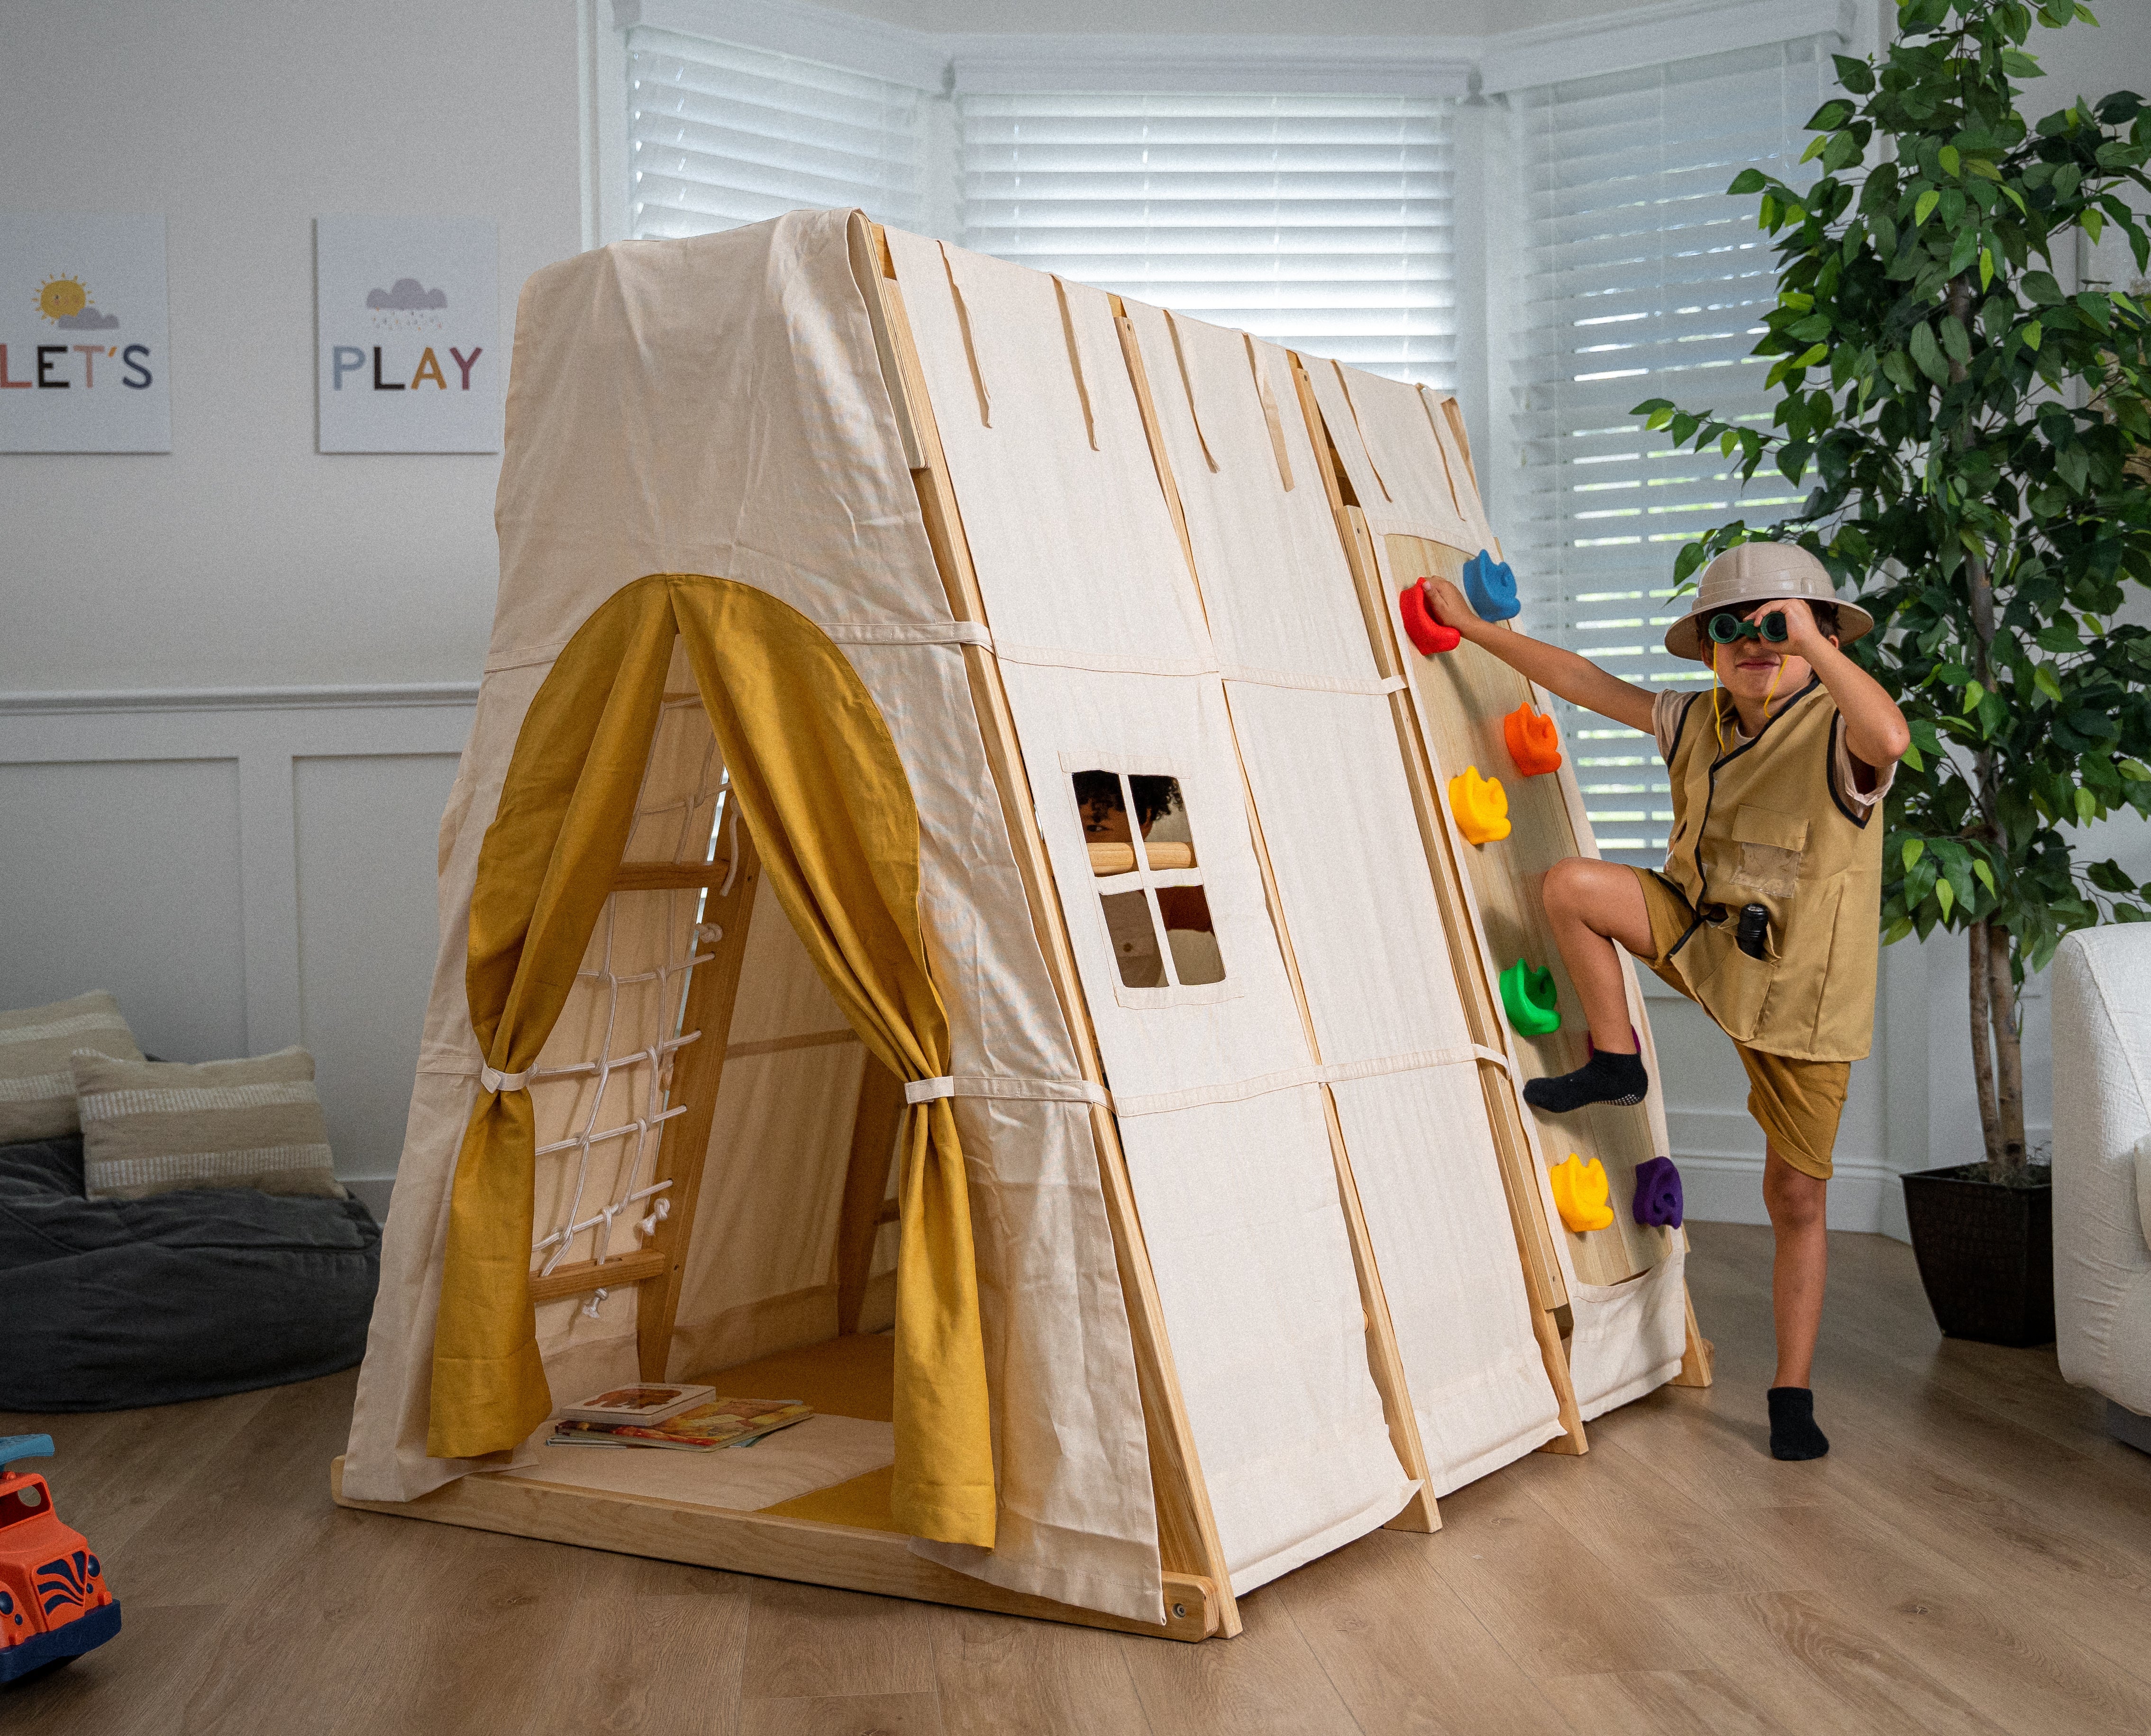 Magnolia Tent Covering For Magnolia Playset - Climber not Included